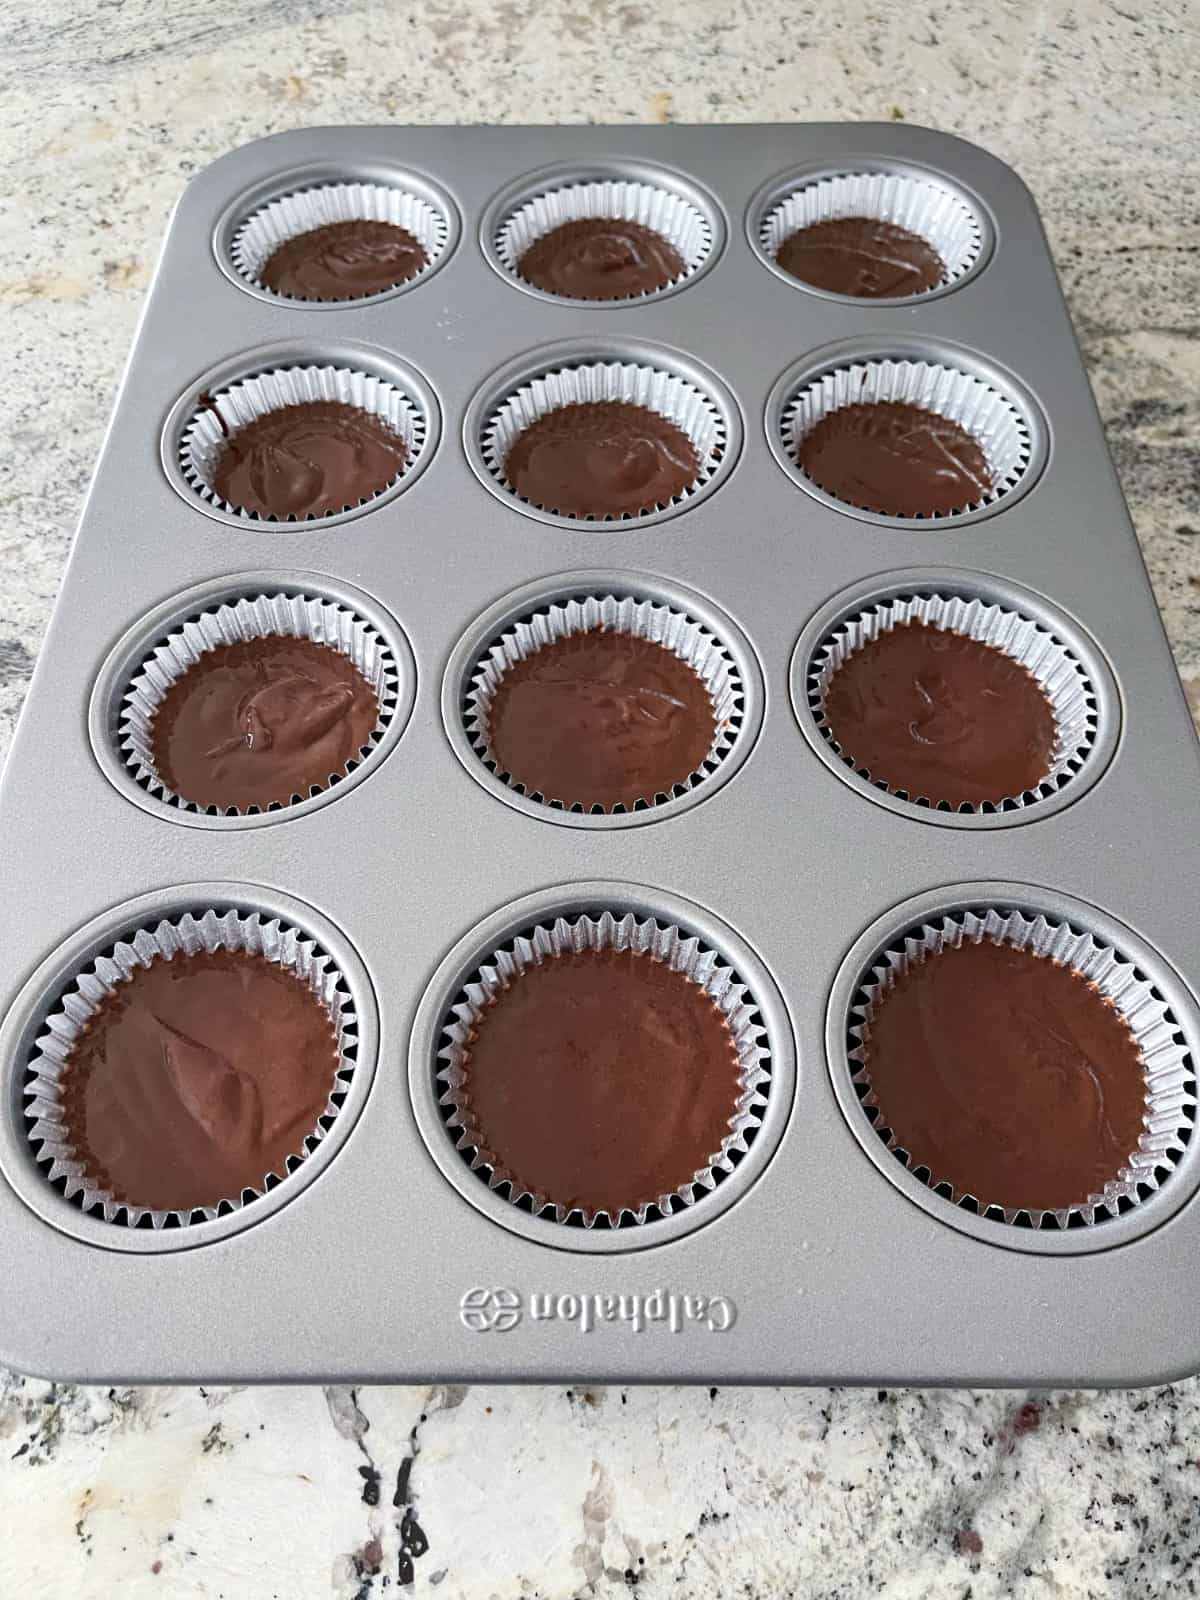 Unbaked chocolate cupcakes in muffin pan.